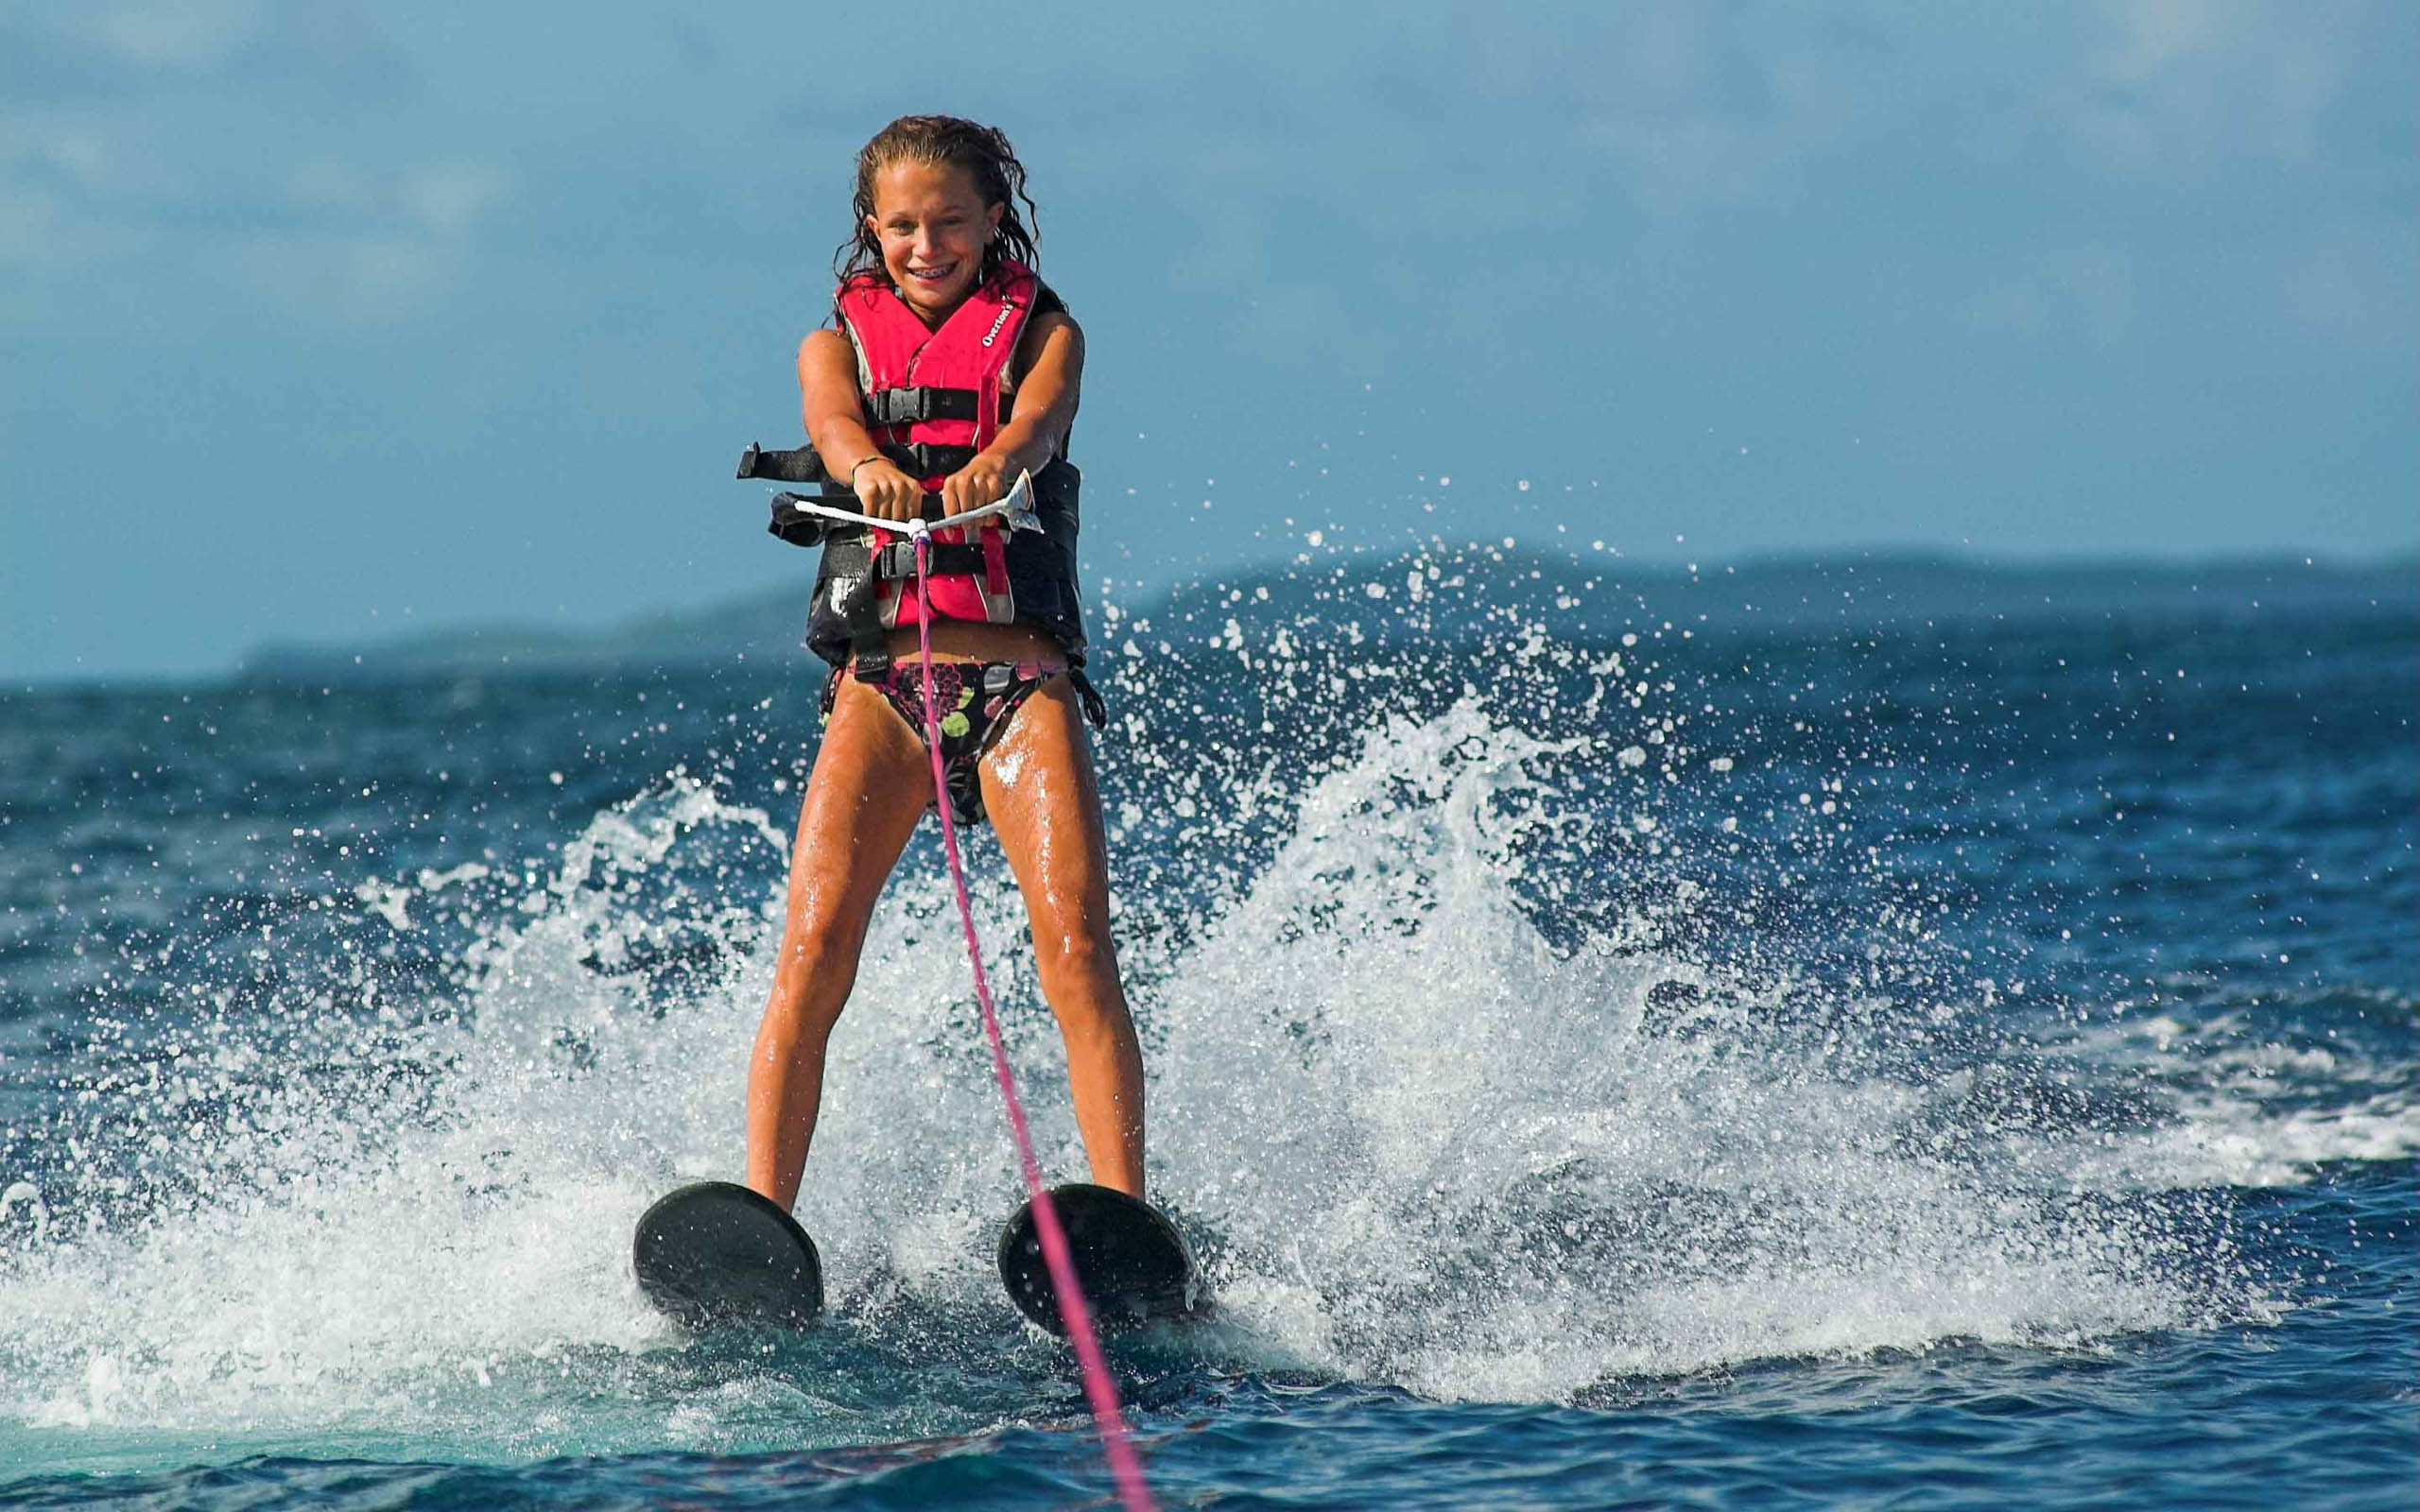 A girl in a life jacket on water skis.